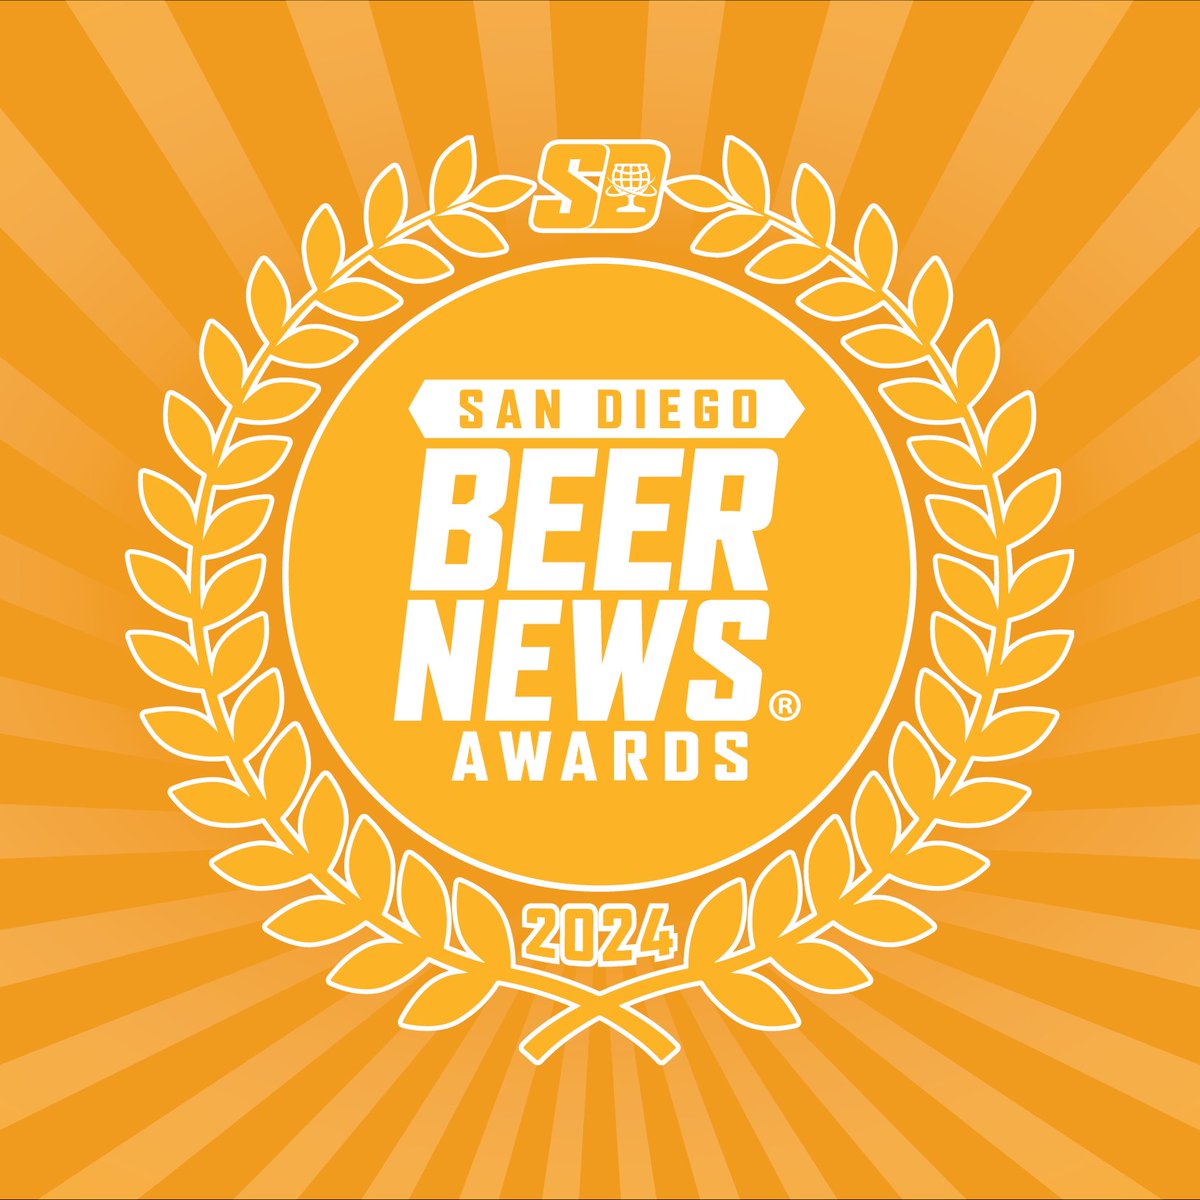 It's almost that time of year! The 4th annual San Deigo Beer News Awards ceremony will take place at Stone Brewing World Bistro & Gardens on March 26, 2024 🏆

☑️ You'll be able to cast your nominations on the @sdbeernews Instagram from January 2nd through February 1st.